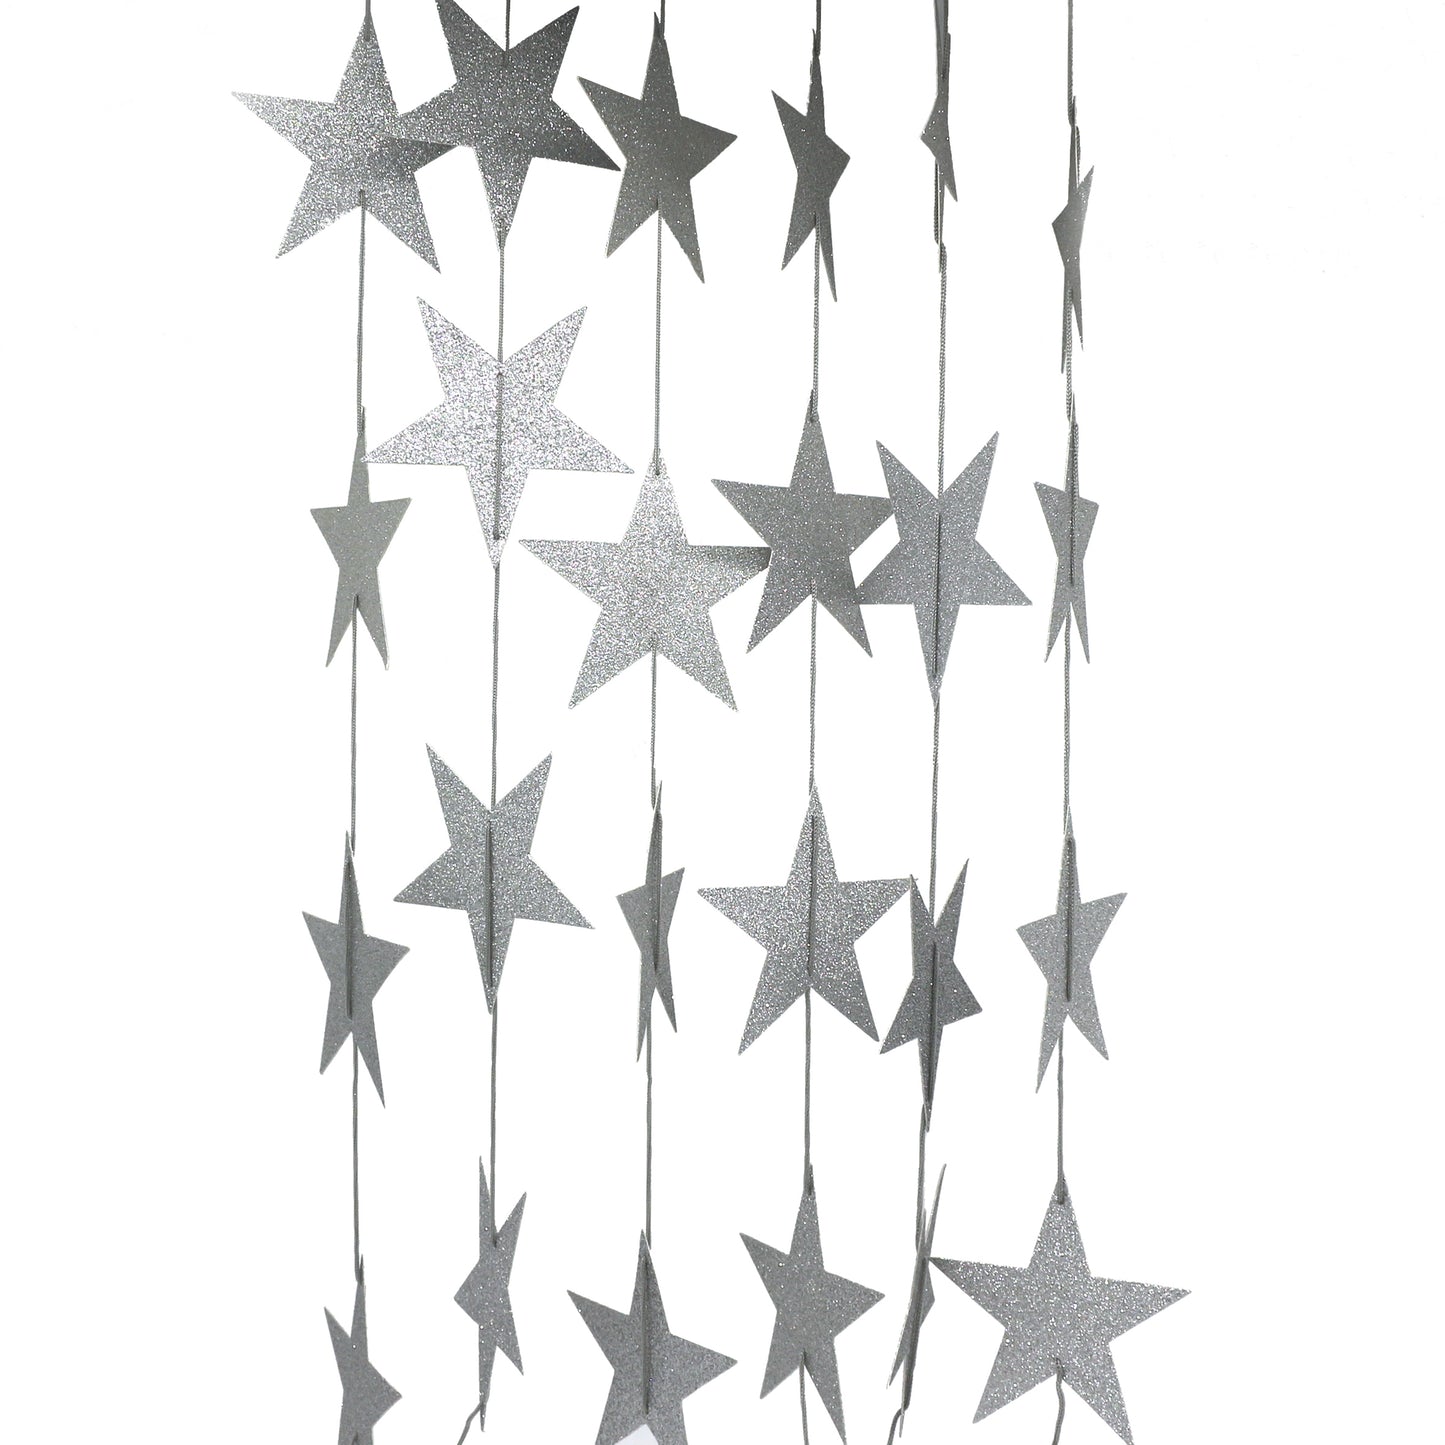 CVHOMEDECO. Silver Glittered Paper Star String Star Garland Hanging Décor for Wedding Birthday Party Festival Home Background Decorative, 8.2 feet, Pack of 2 PCS